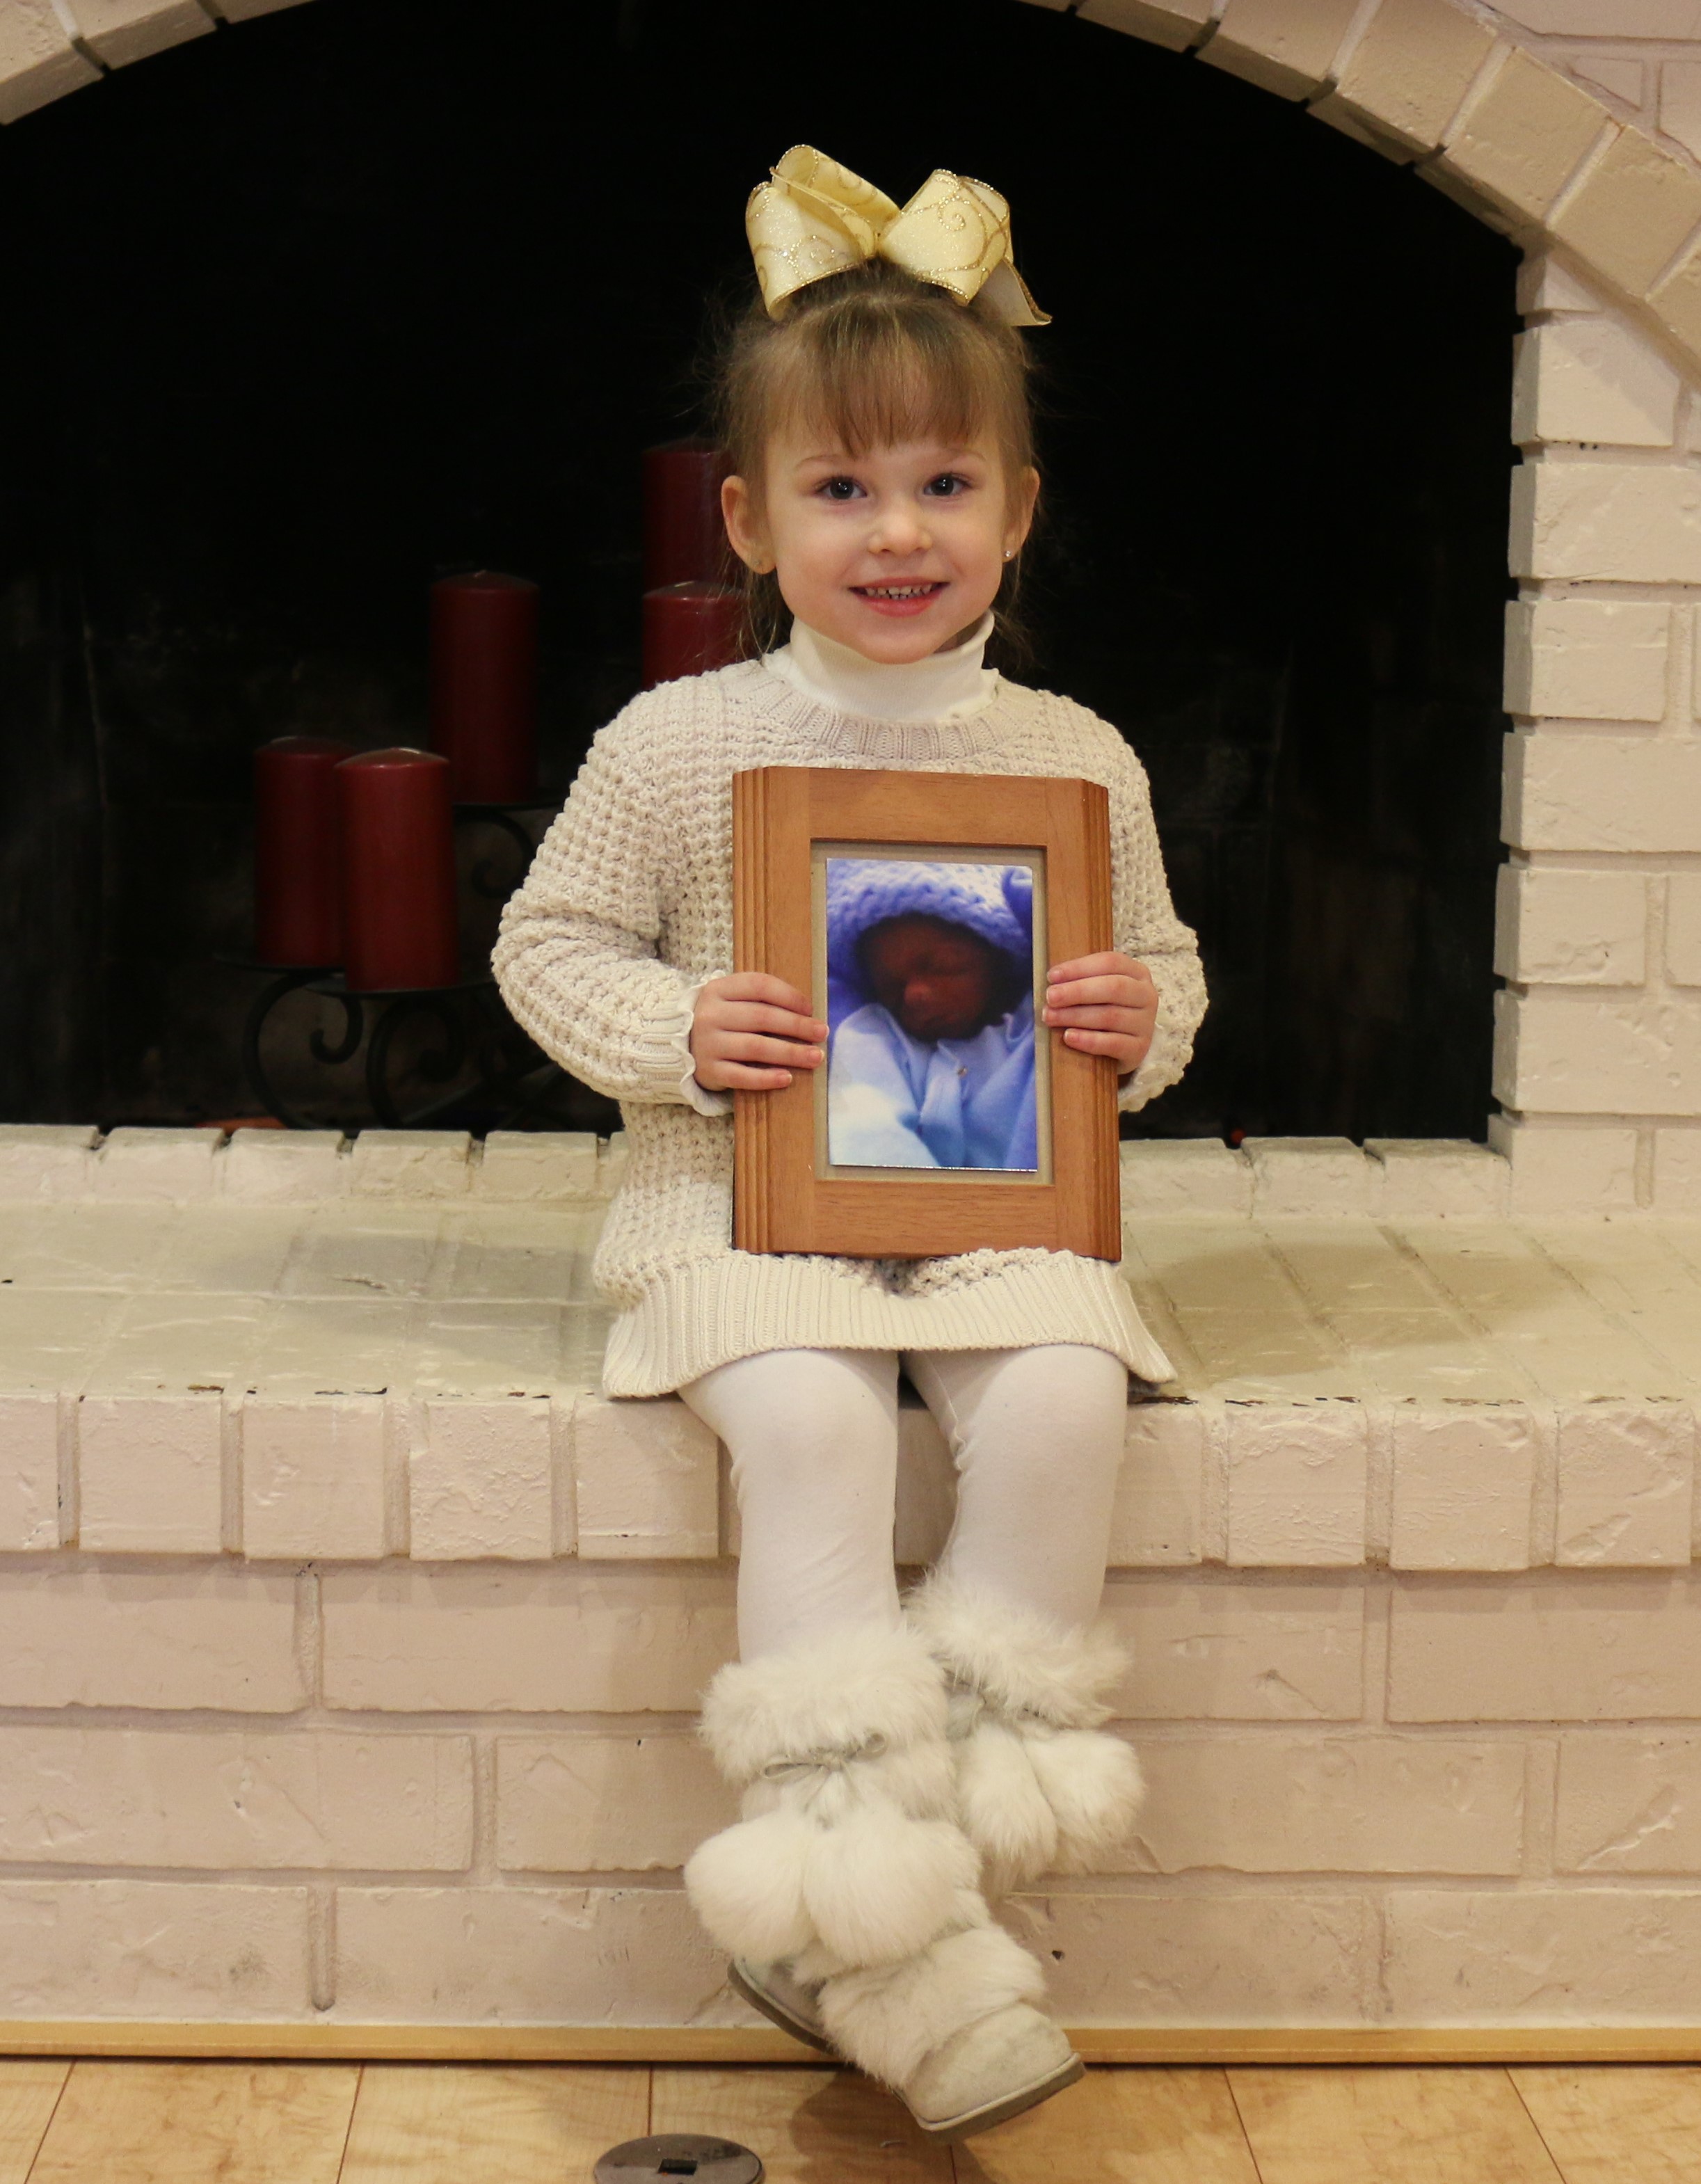 Amanda's daughter holding a picture of her brother